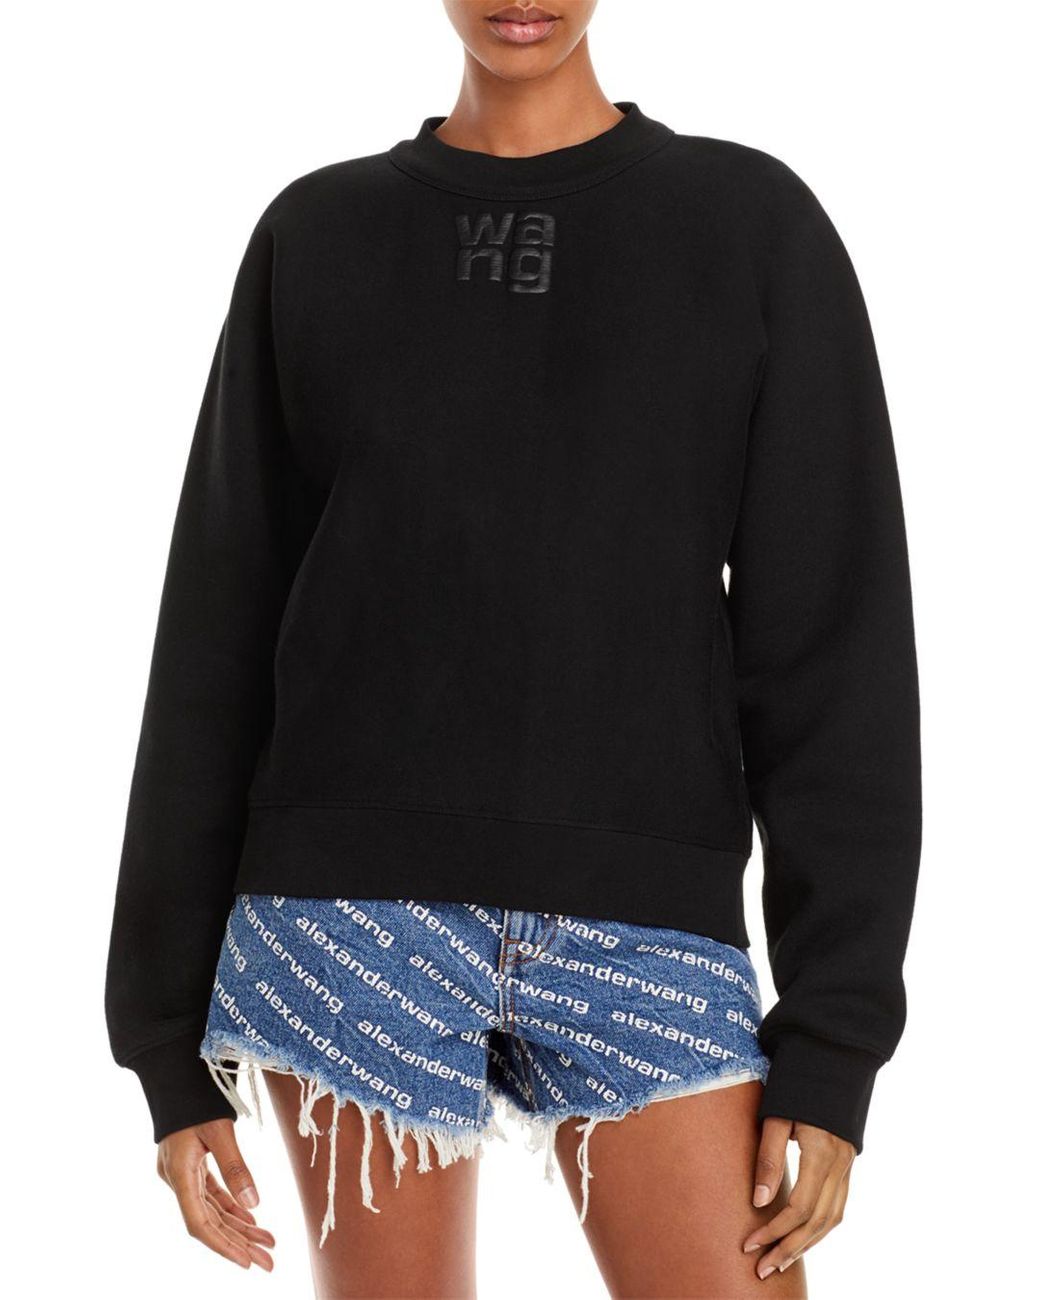 T By Alexander Wang Foundation Cotton Terry Sweatshirt in Black - Lyst